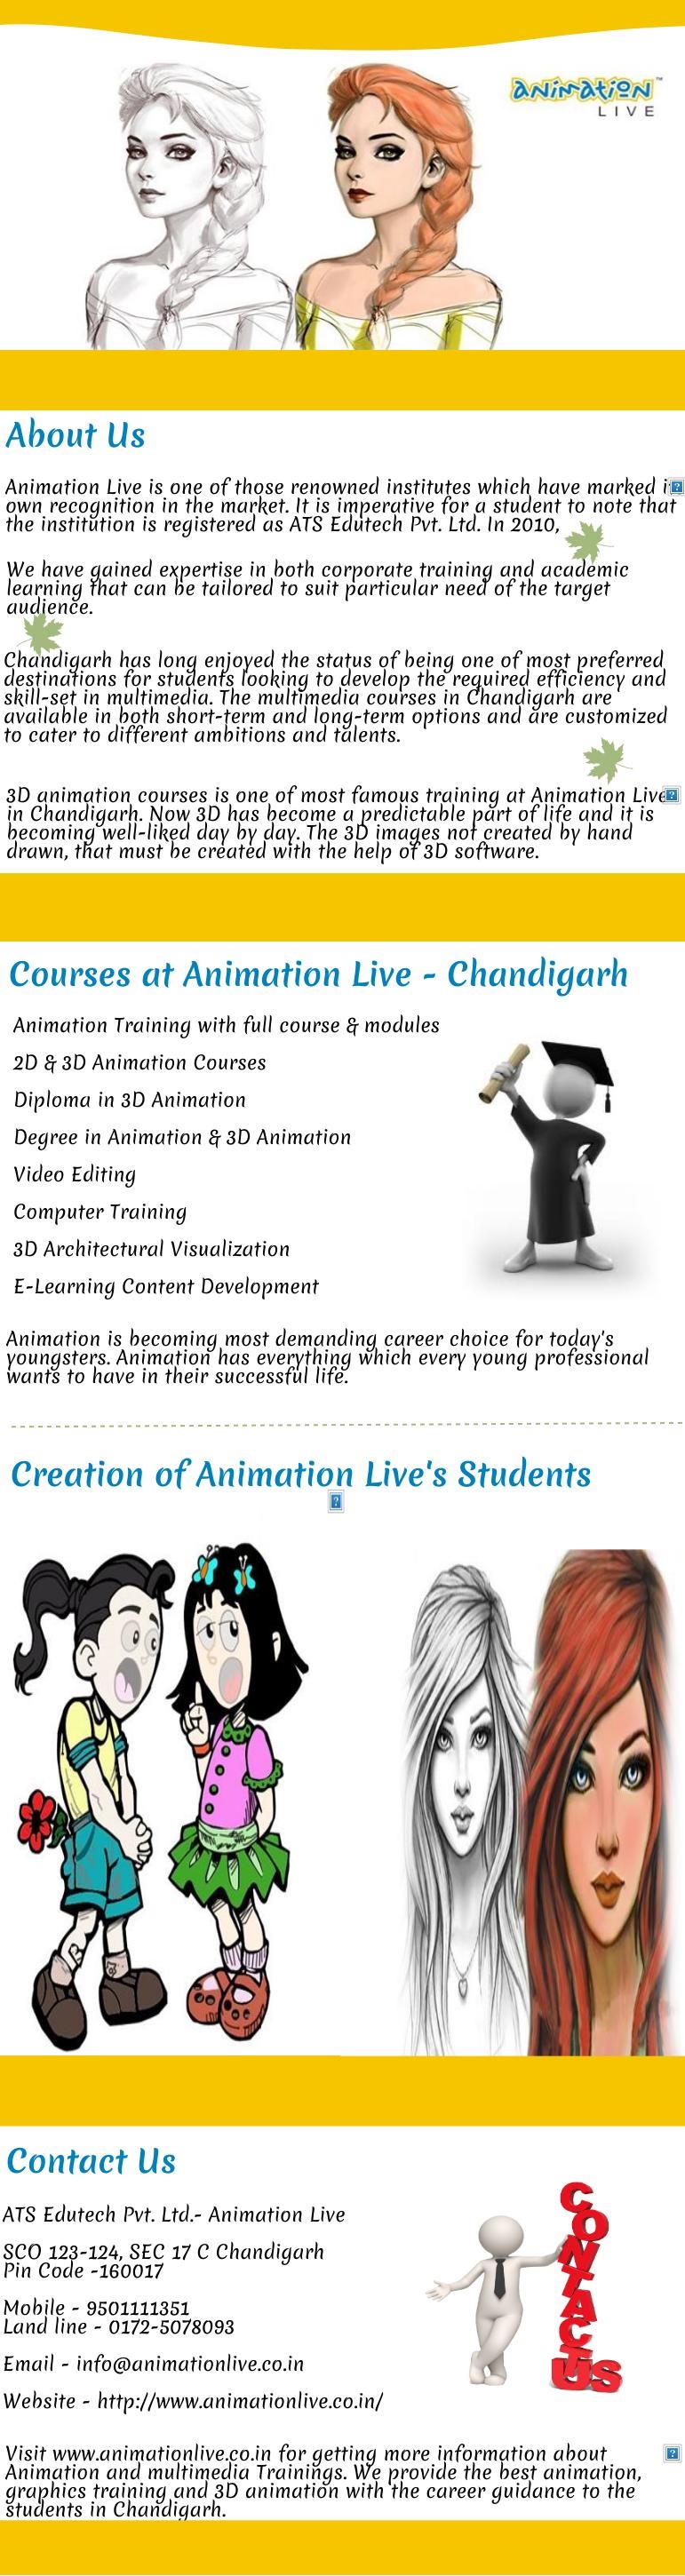 3D Animation in Chandigarh - AnimationLive 